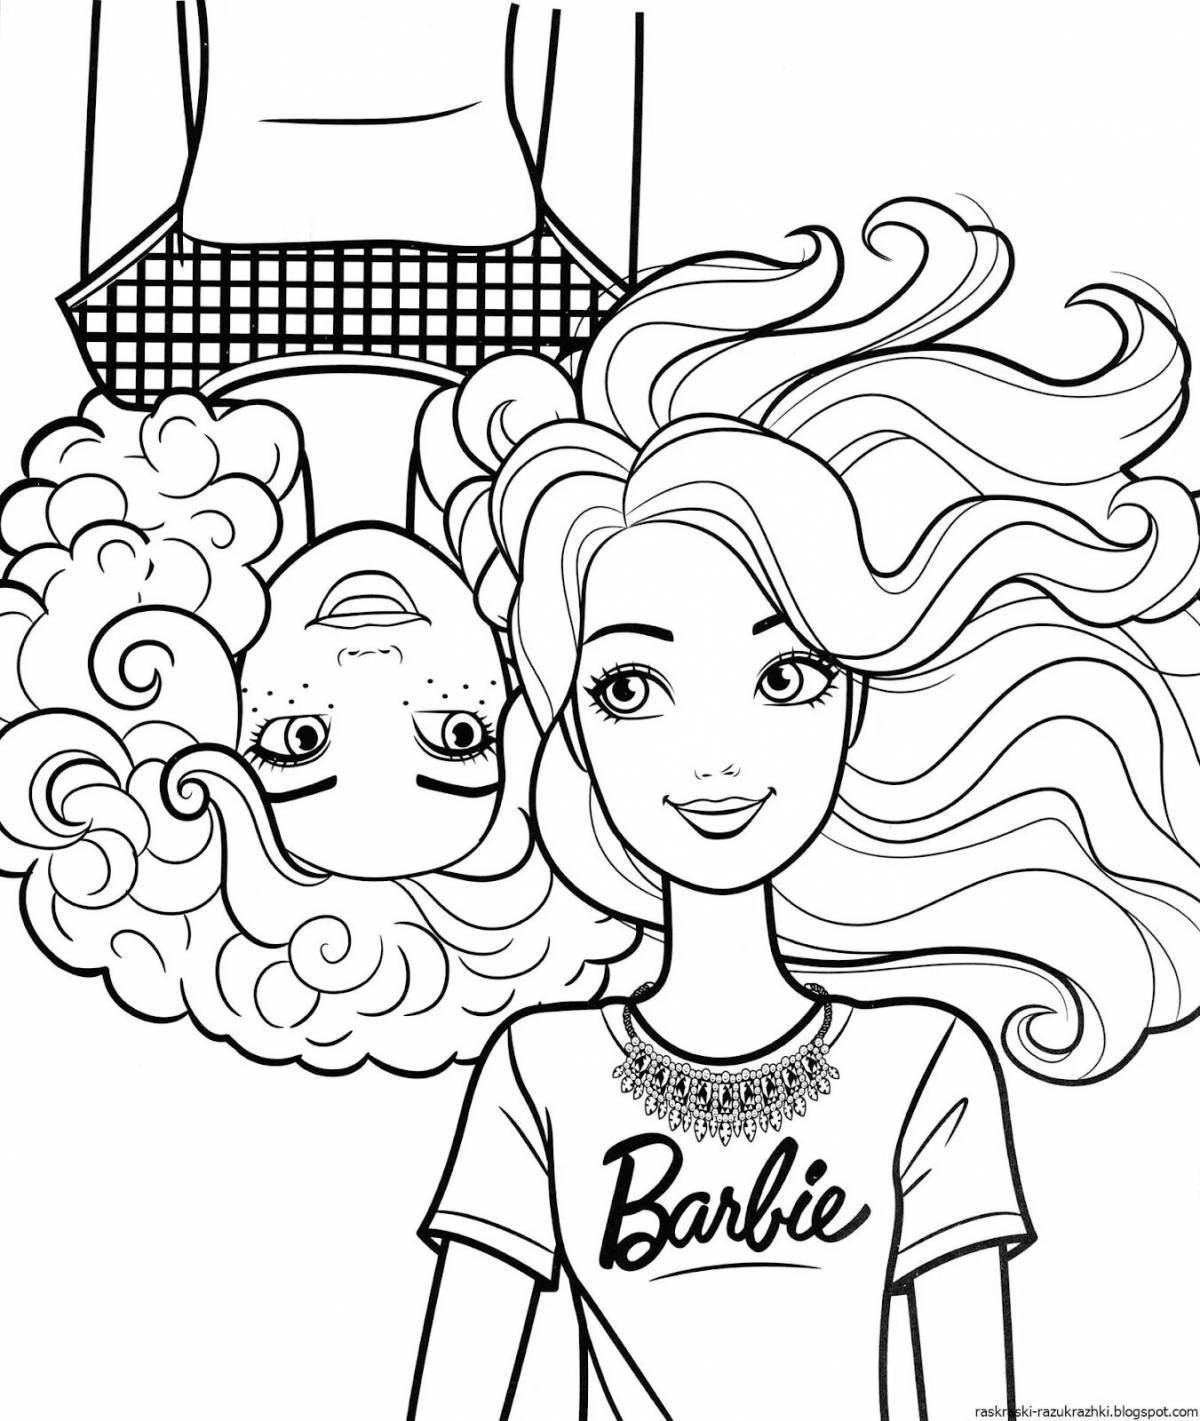 Coloring pages of two color-obsessed friends